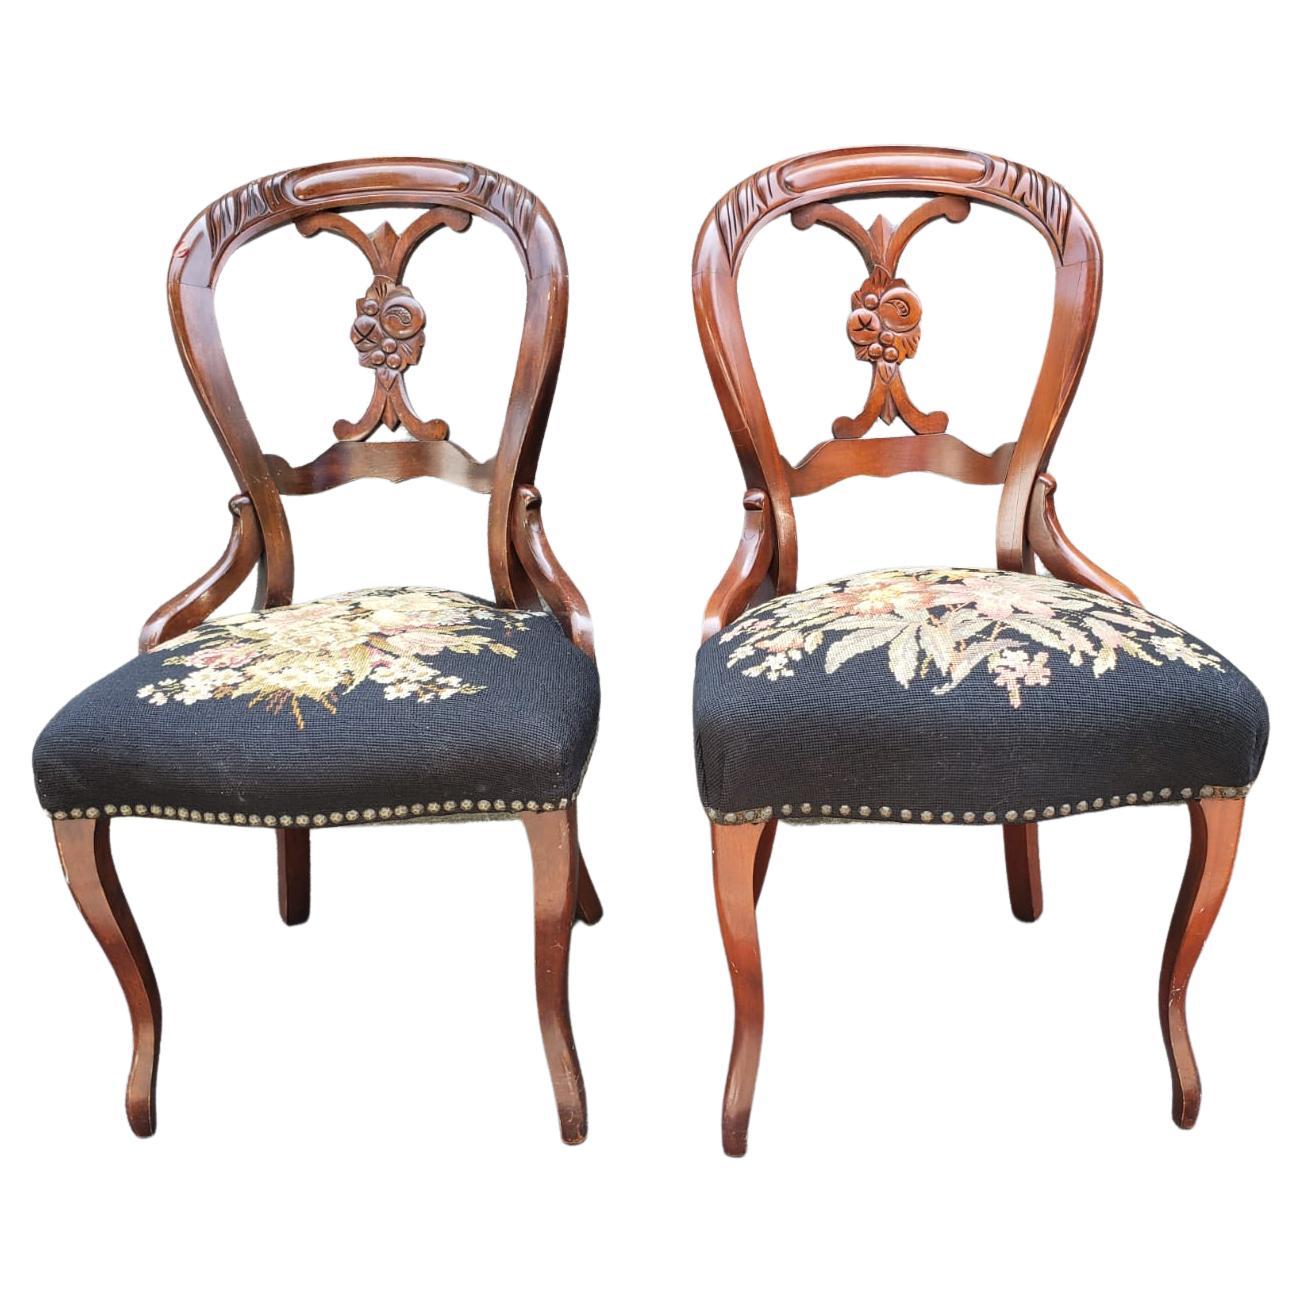 Victorian Mahogany & Floral NeedlePoint Upholstered Chairs with NailHead Trims For Sale